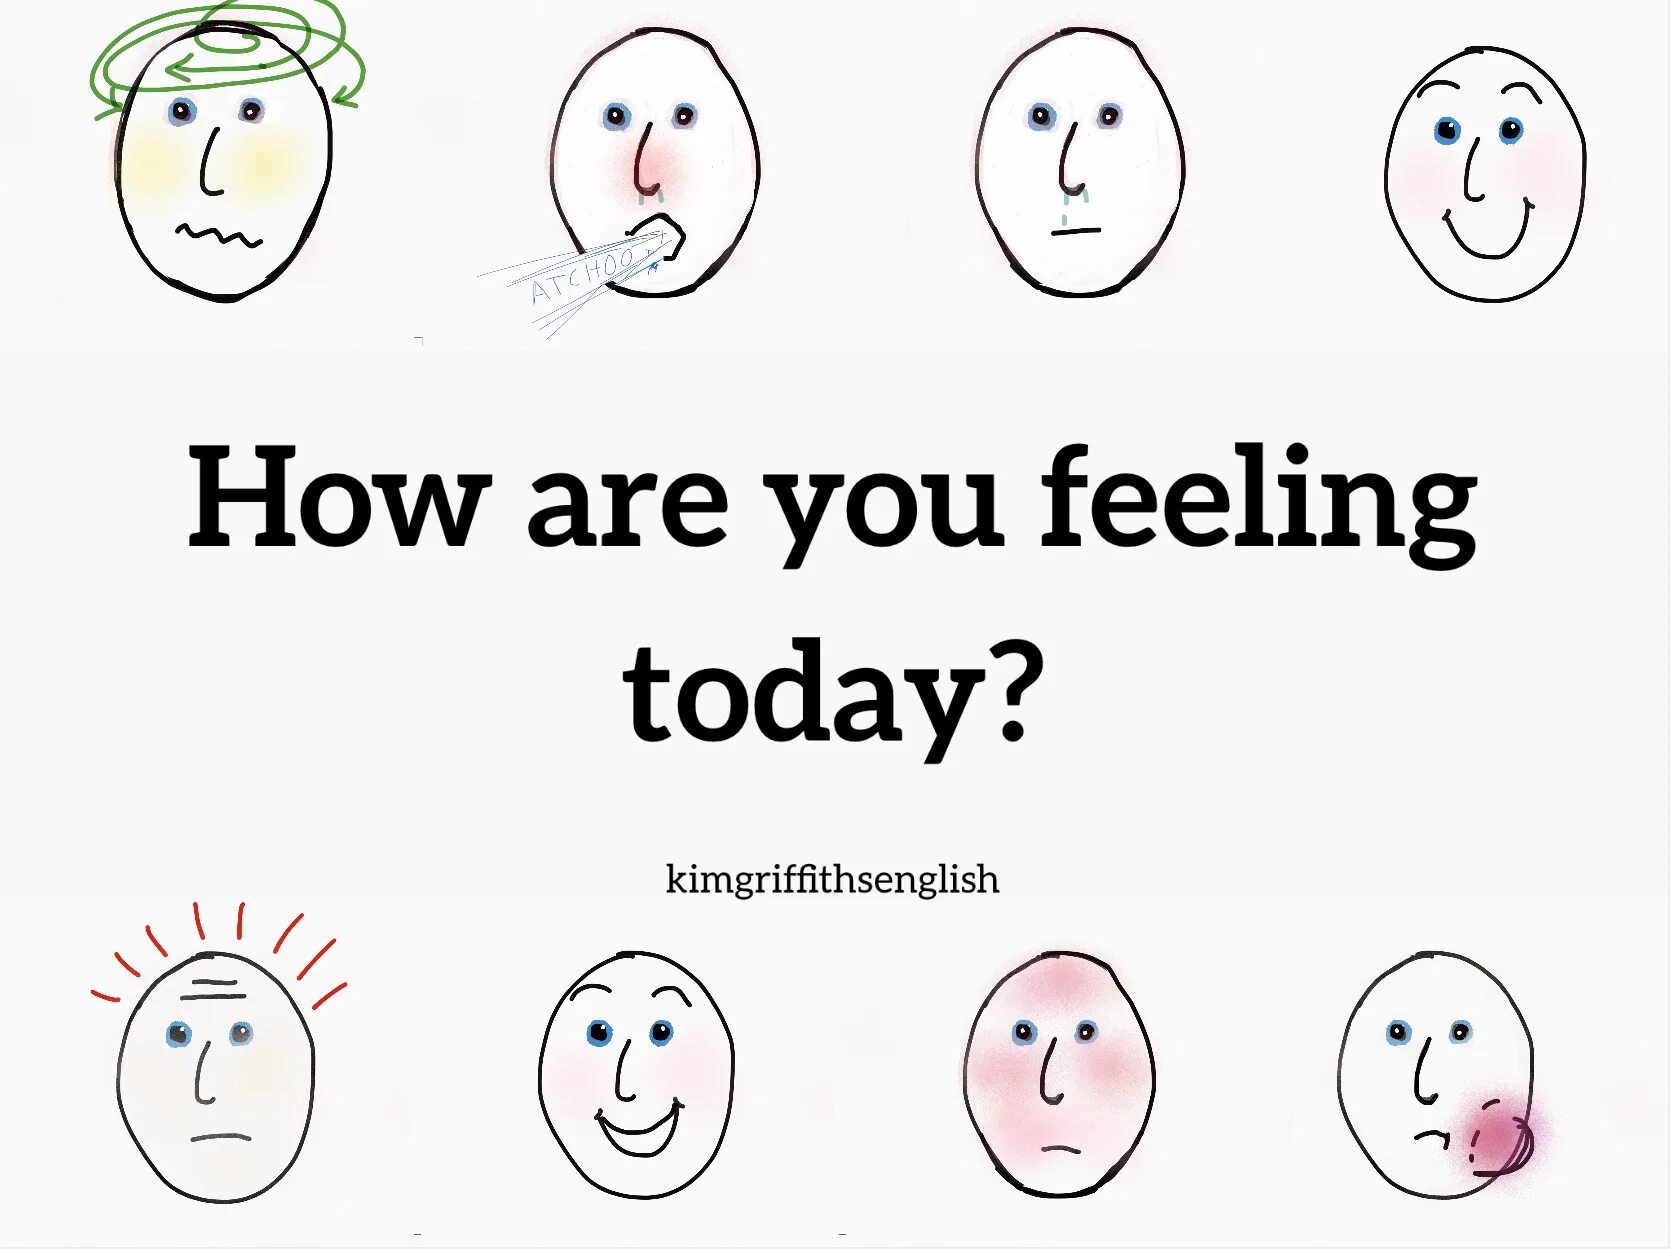 How are you feeling?. How are you feeling today. How are you картинки. How are you feeling today картинки.